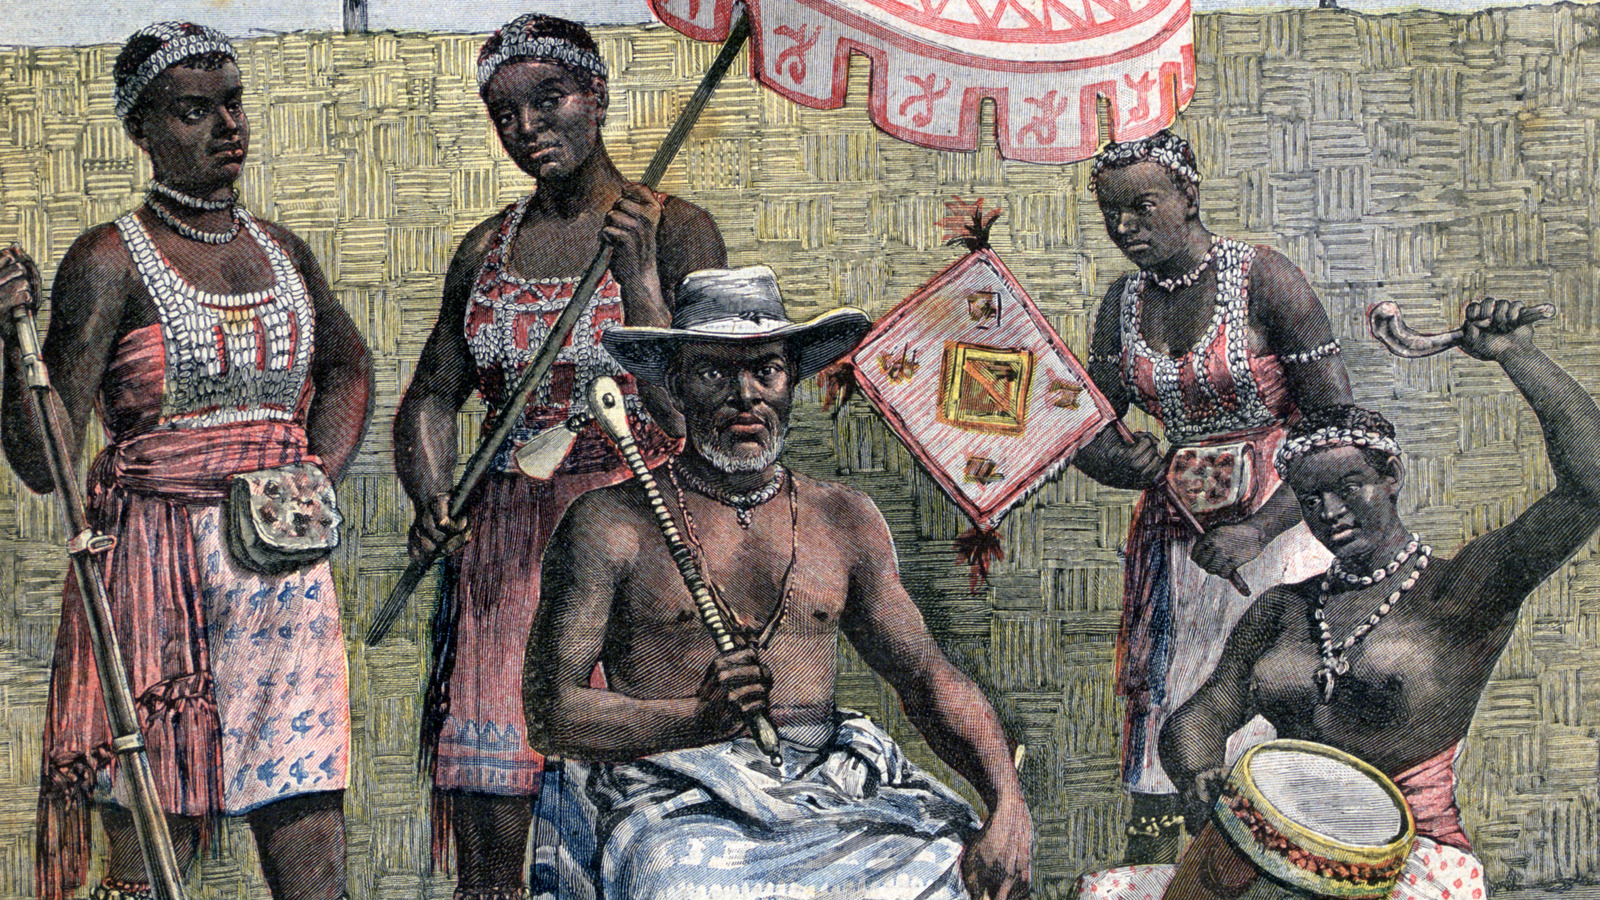  An illustration of King Ghezo of the Dahomey Kingdom, a 19th-century West African kingdom, is shown with some members of his court.